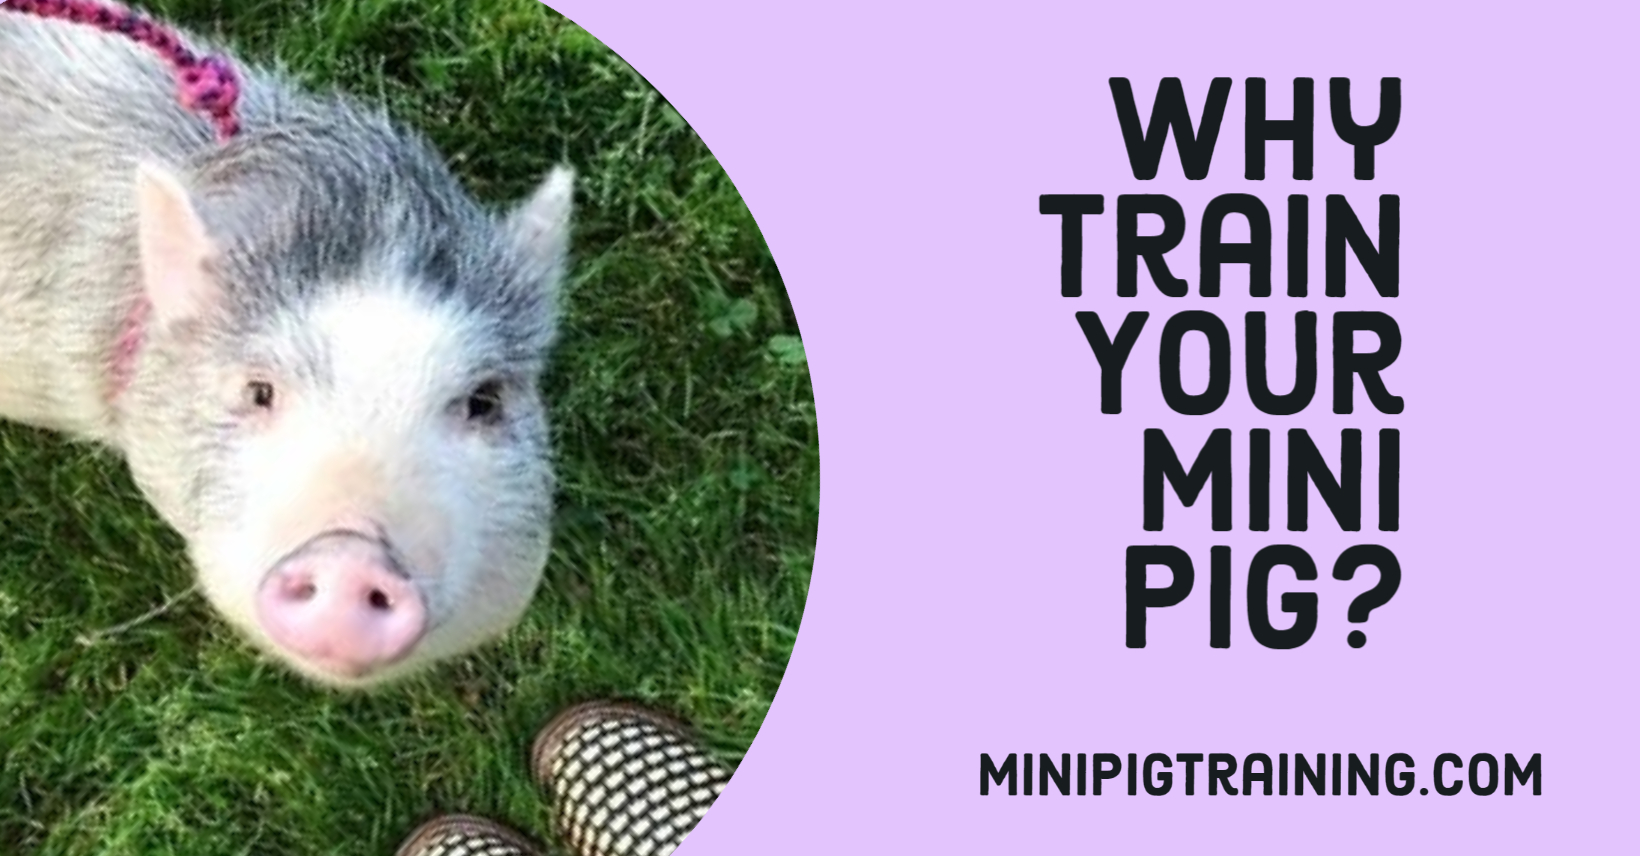 Why Train Your Mini Pig